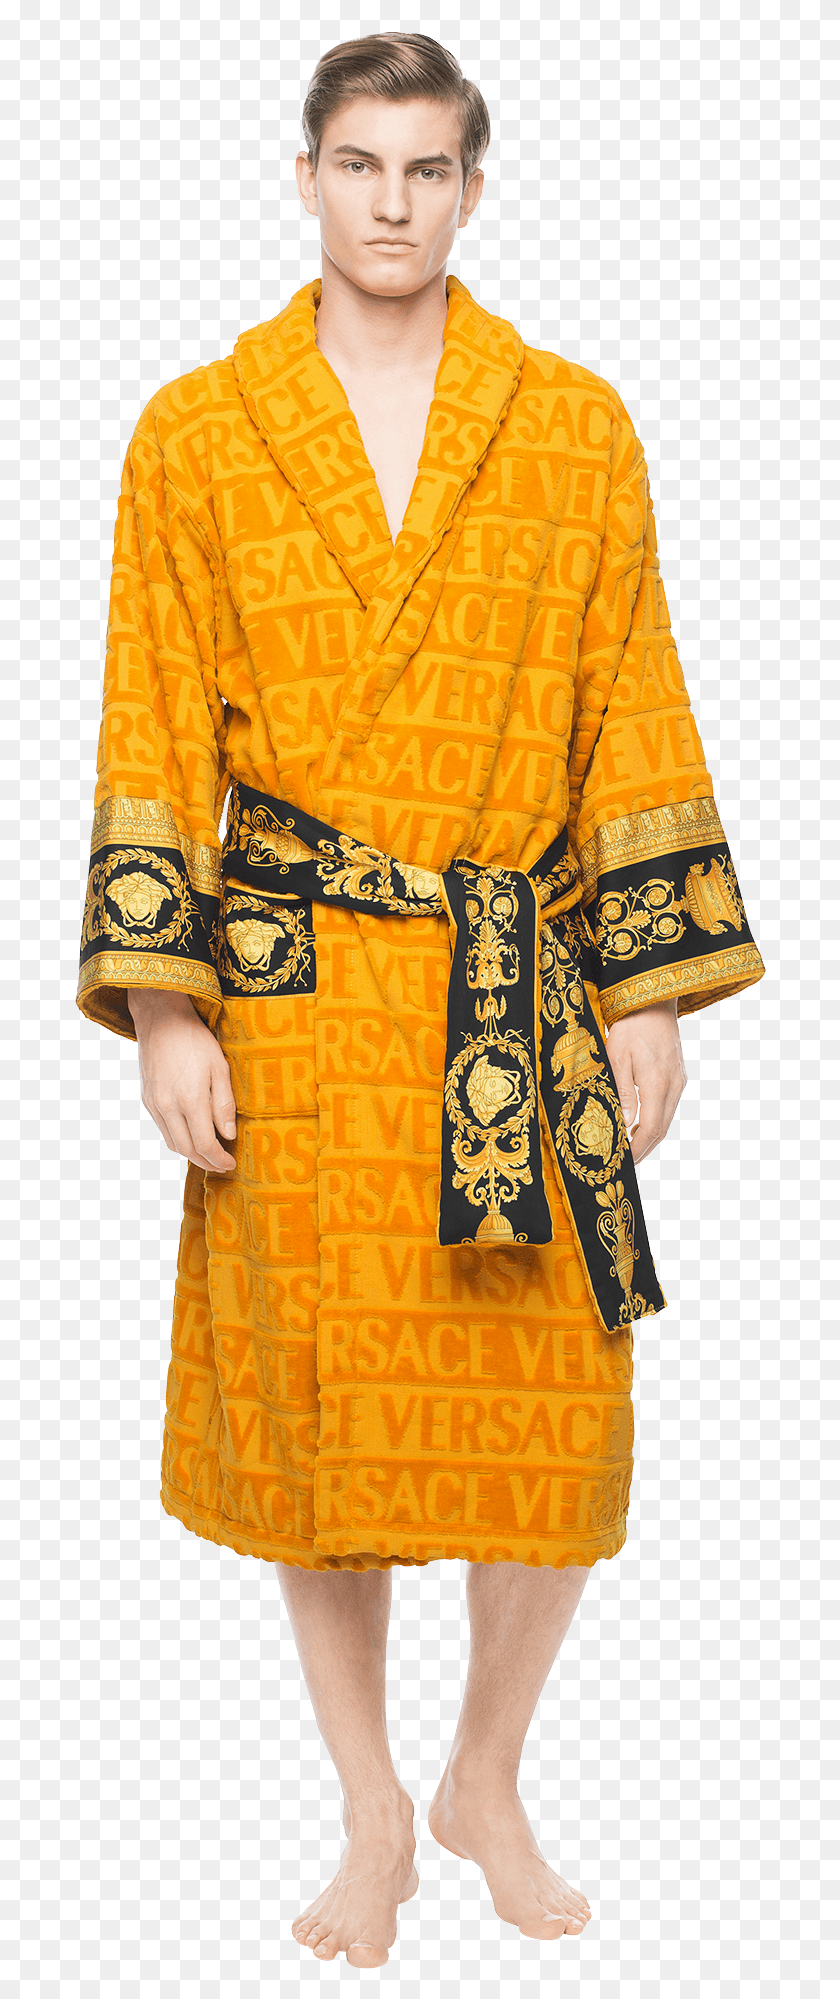 692x1939 Covered In A Faint Textural Versace Logo Print And Gucci Robe And Slippers, Clothing, Apparel, Fashion Descargar Hd Png